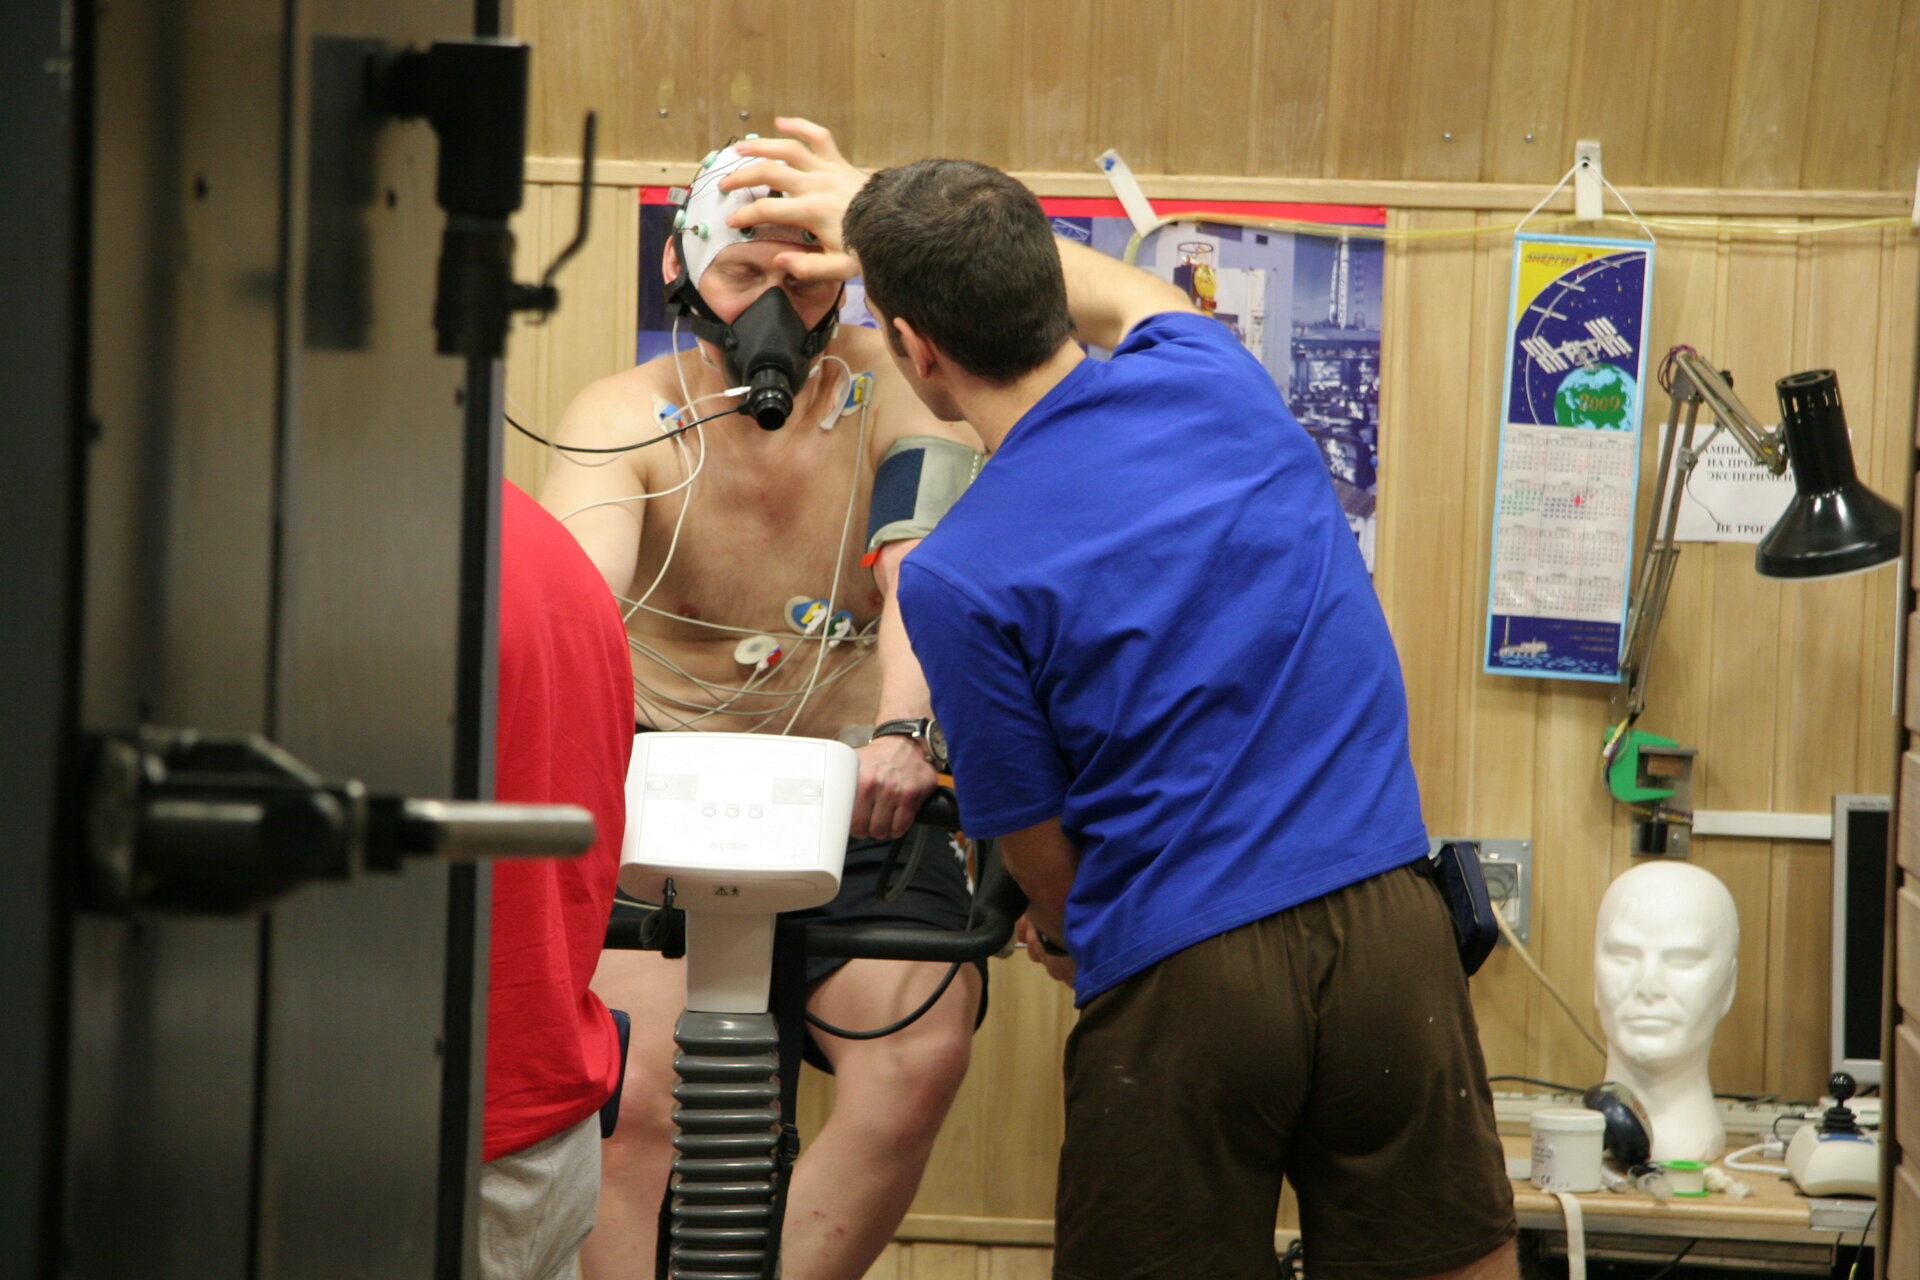 Oliver checks electrodes being used to measure brain activity as Oleg exercises on bicycle ergometer